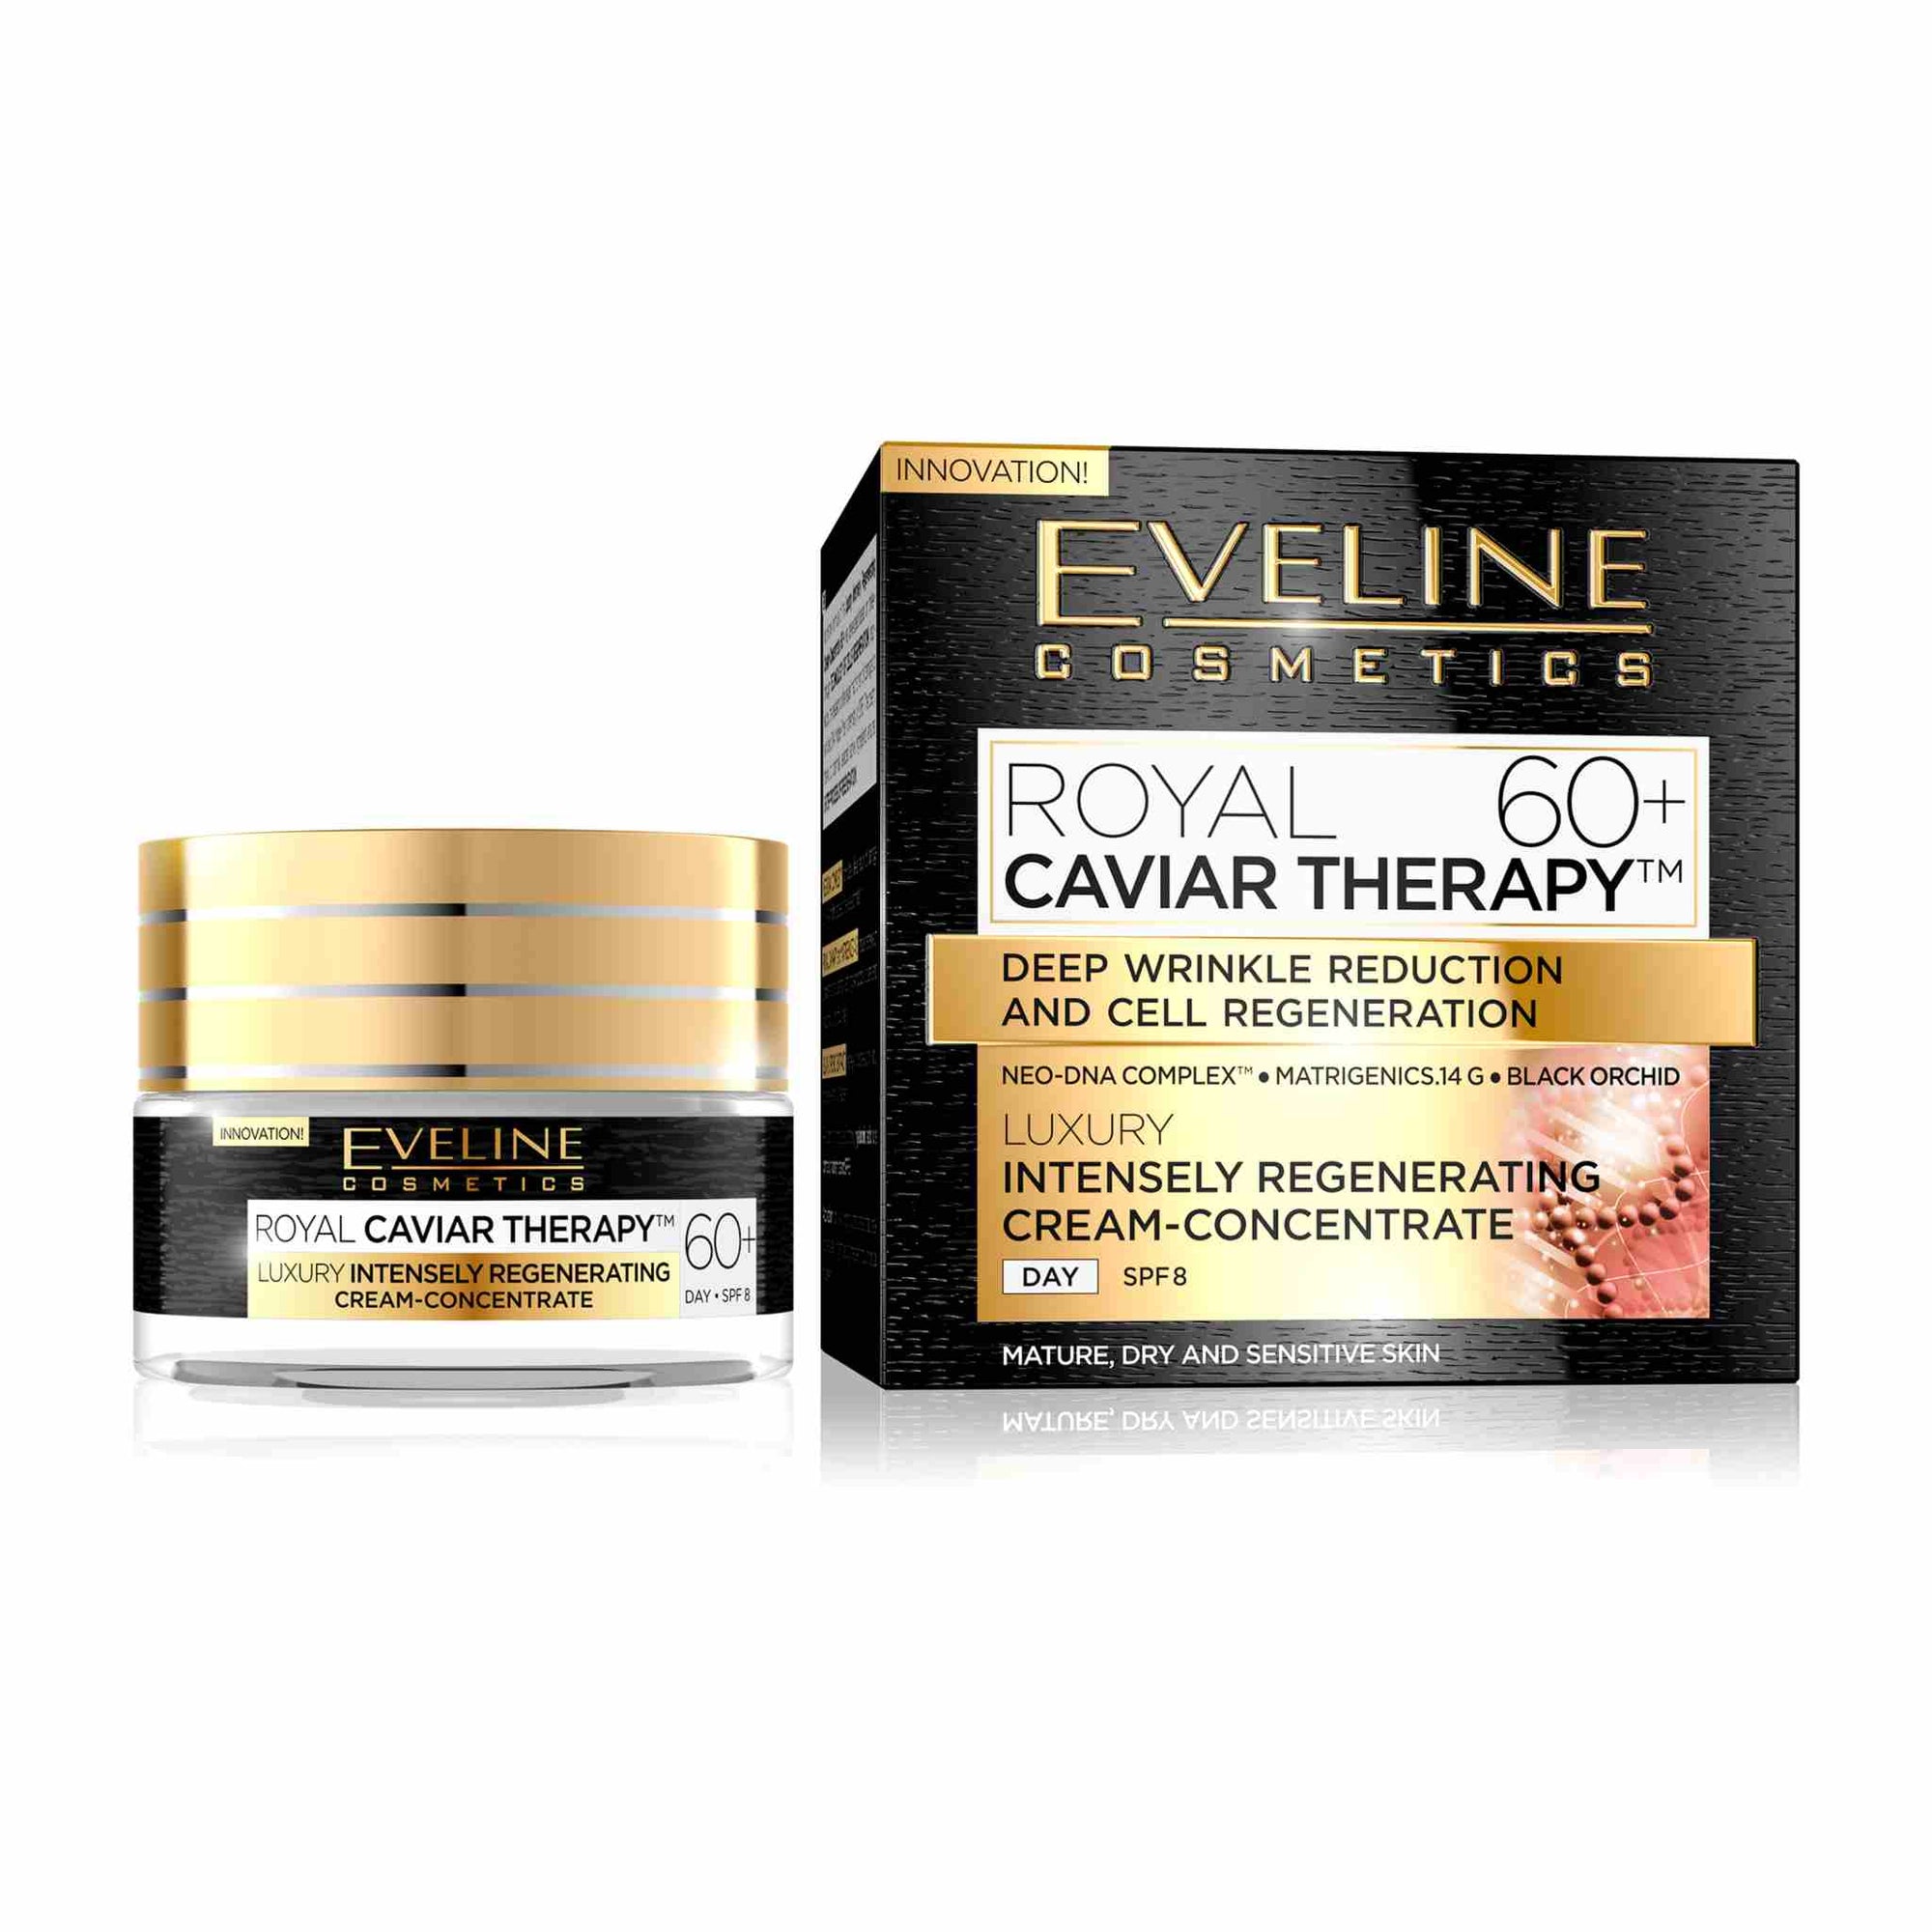 Royal Caviar Therapy Luxury Intesnsely Regenerating Day Cream 60+